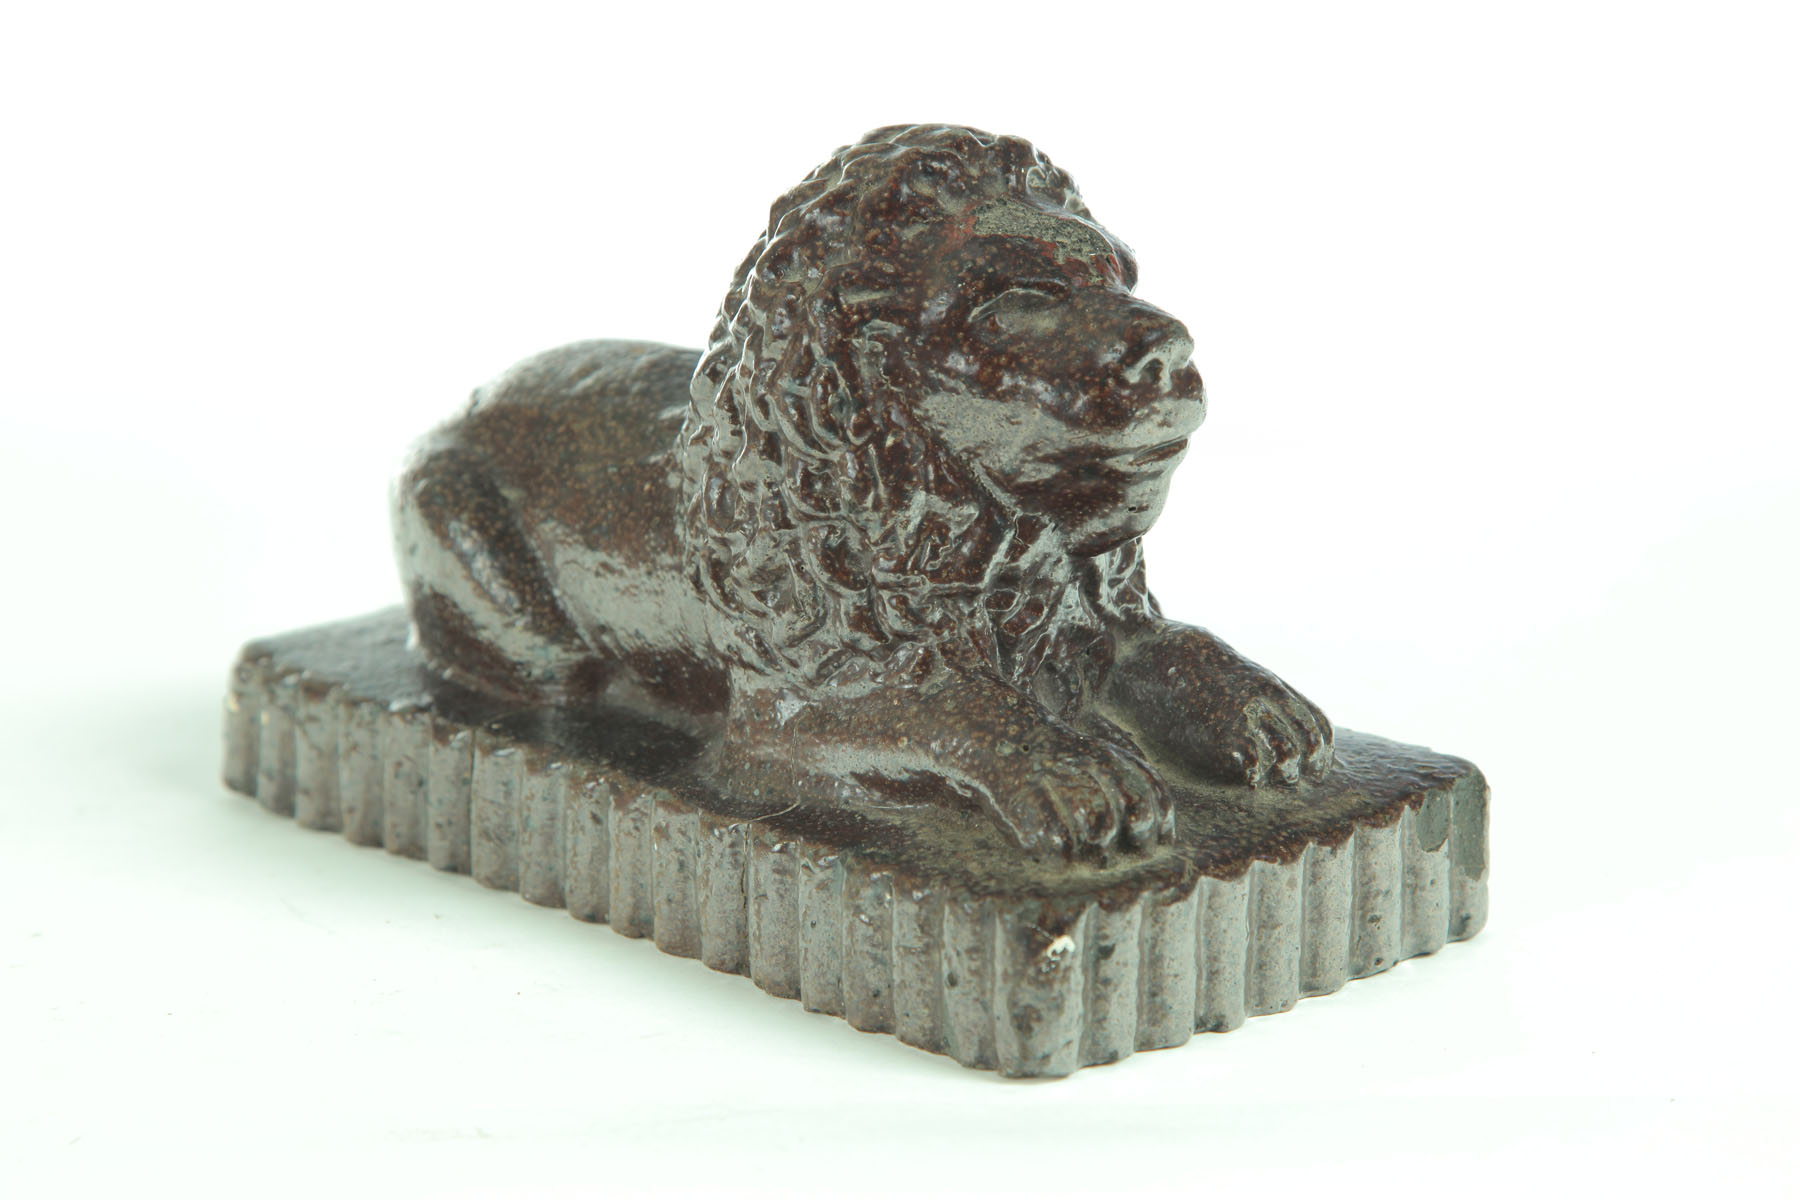 SEWERTILE LION Ohio early 20th 117095